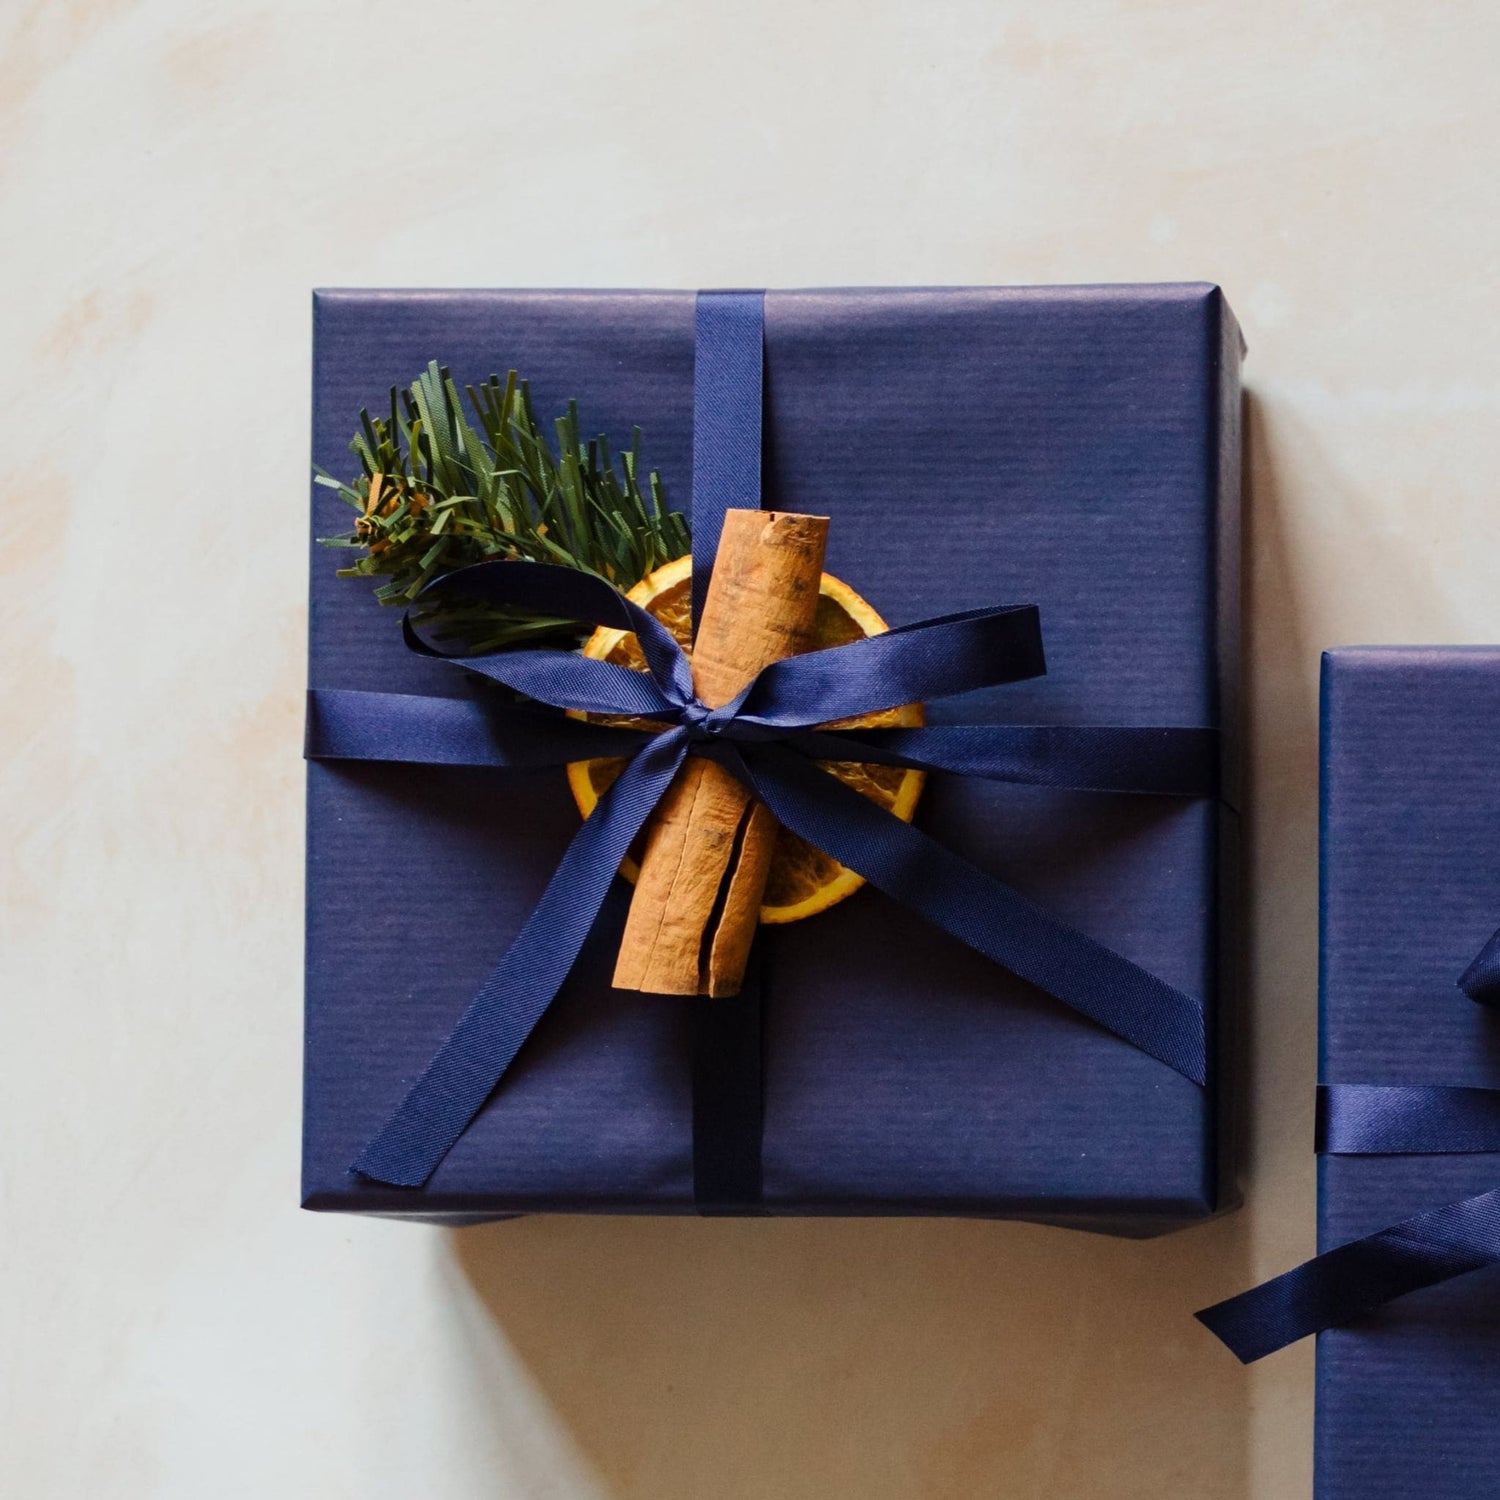 A 400g heather scented 3 wick soy candle from the Home County Co. is shown with luxury Christmas Gift Wrap. The 3 wick candle is wrapped in luxury navy wrapping paper secured with navy ribbon and Christmas embellishments.